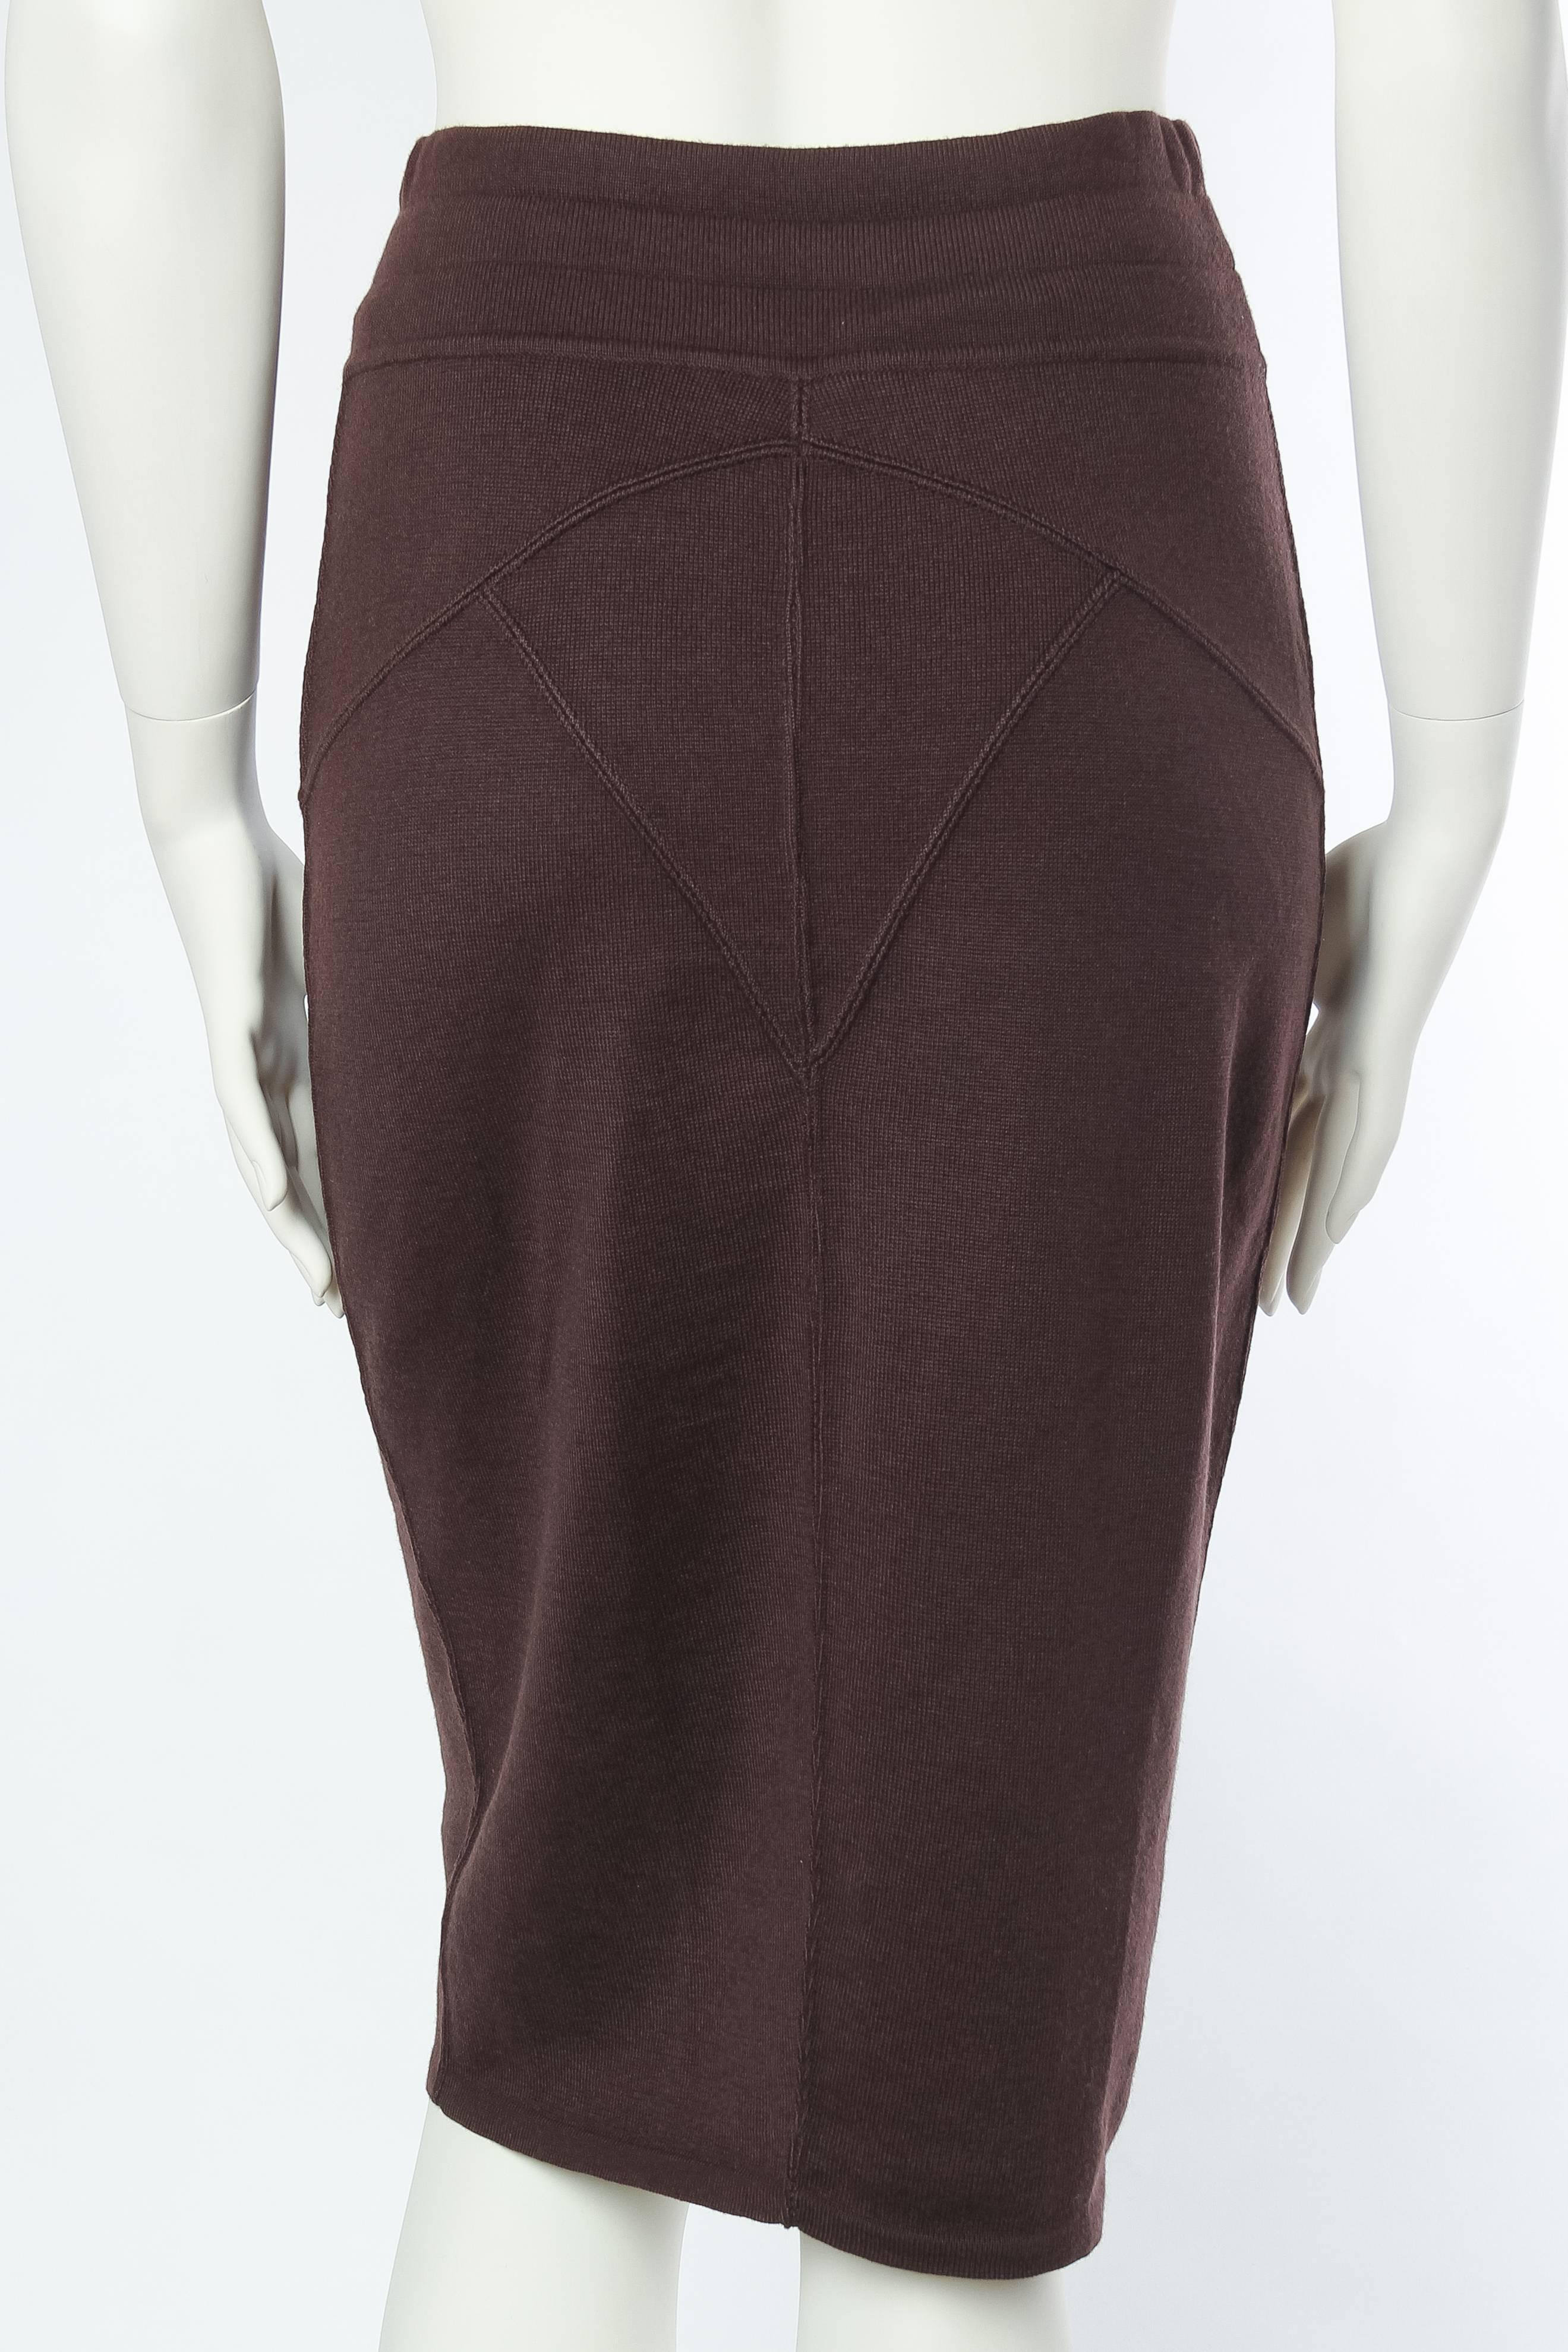 Women's 1980s Alaia Fitted Pencil Skirt